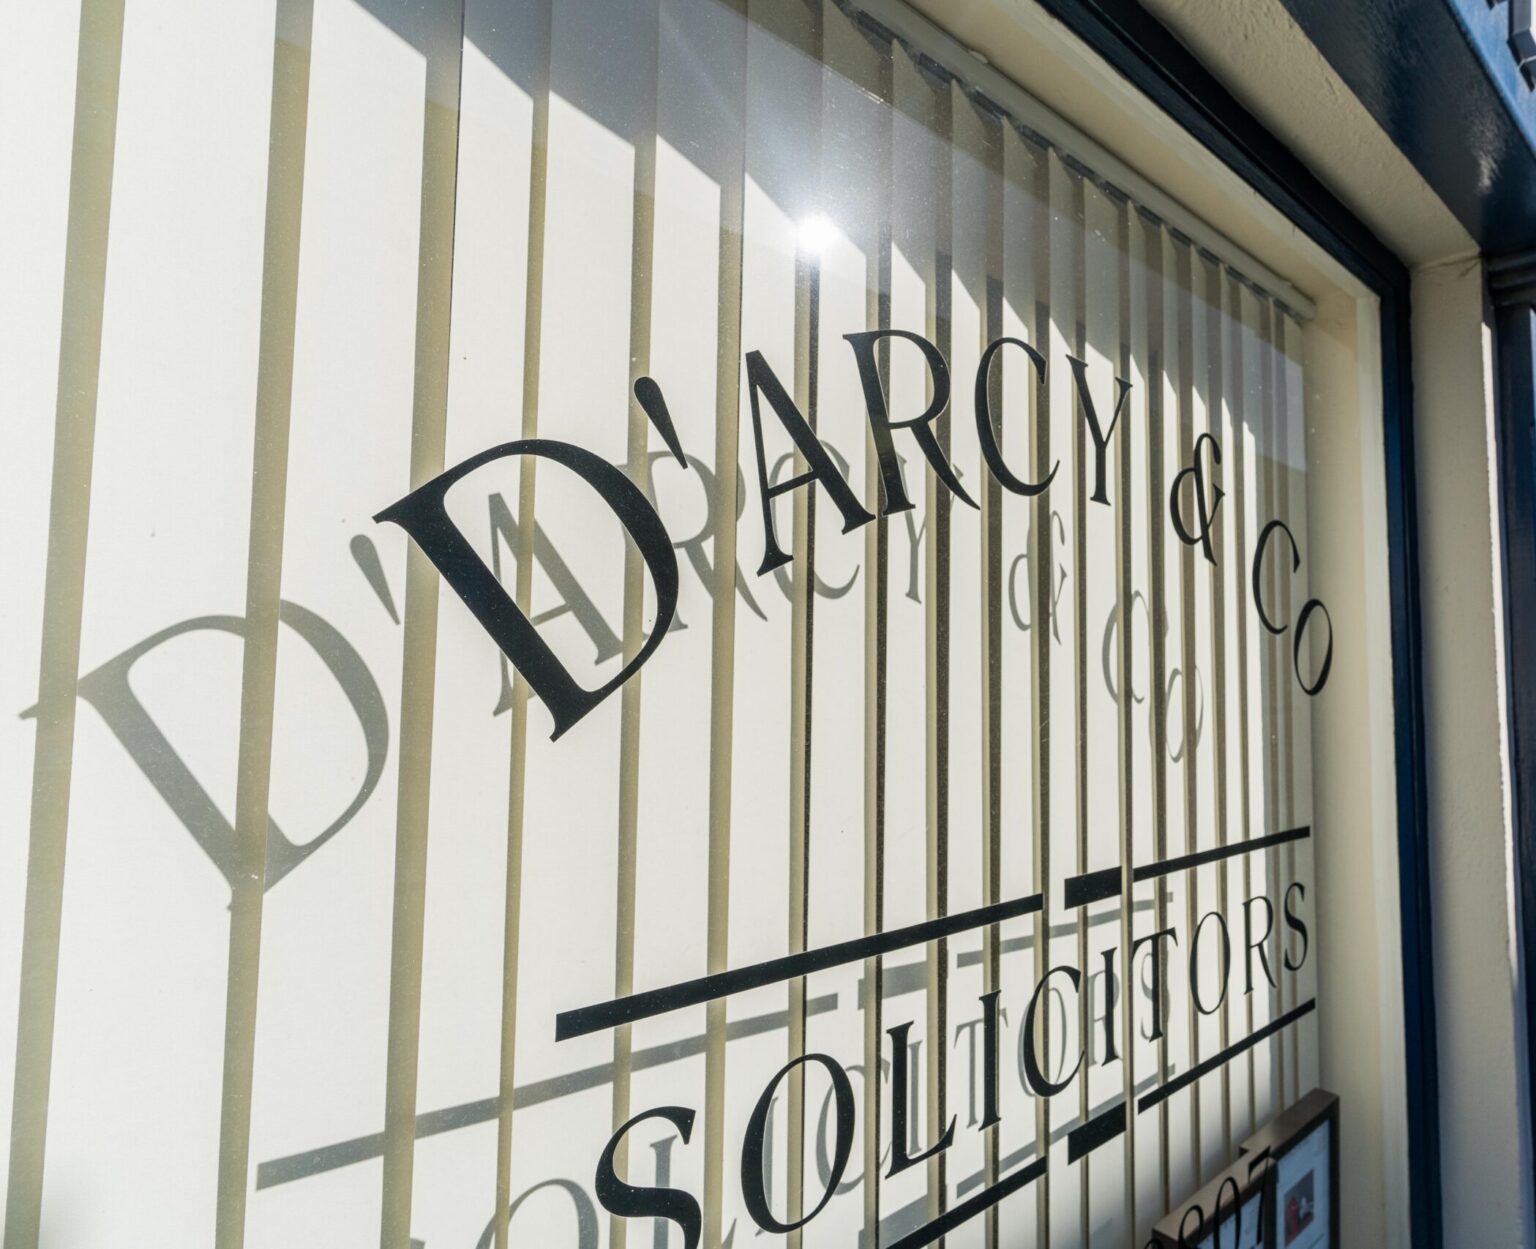 D'Arcy & Co Window Lettering